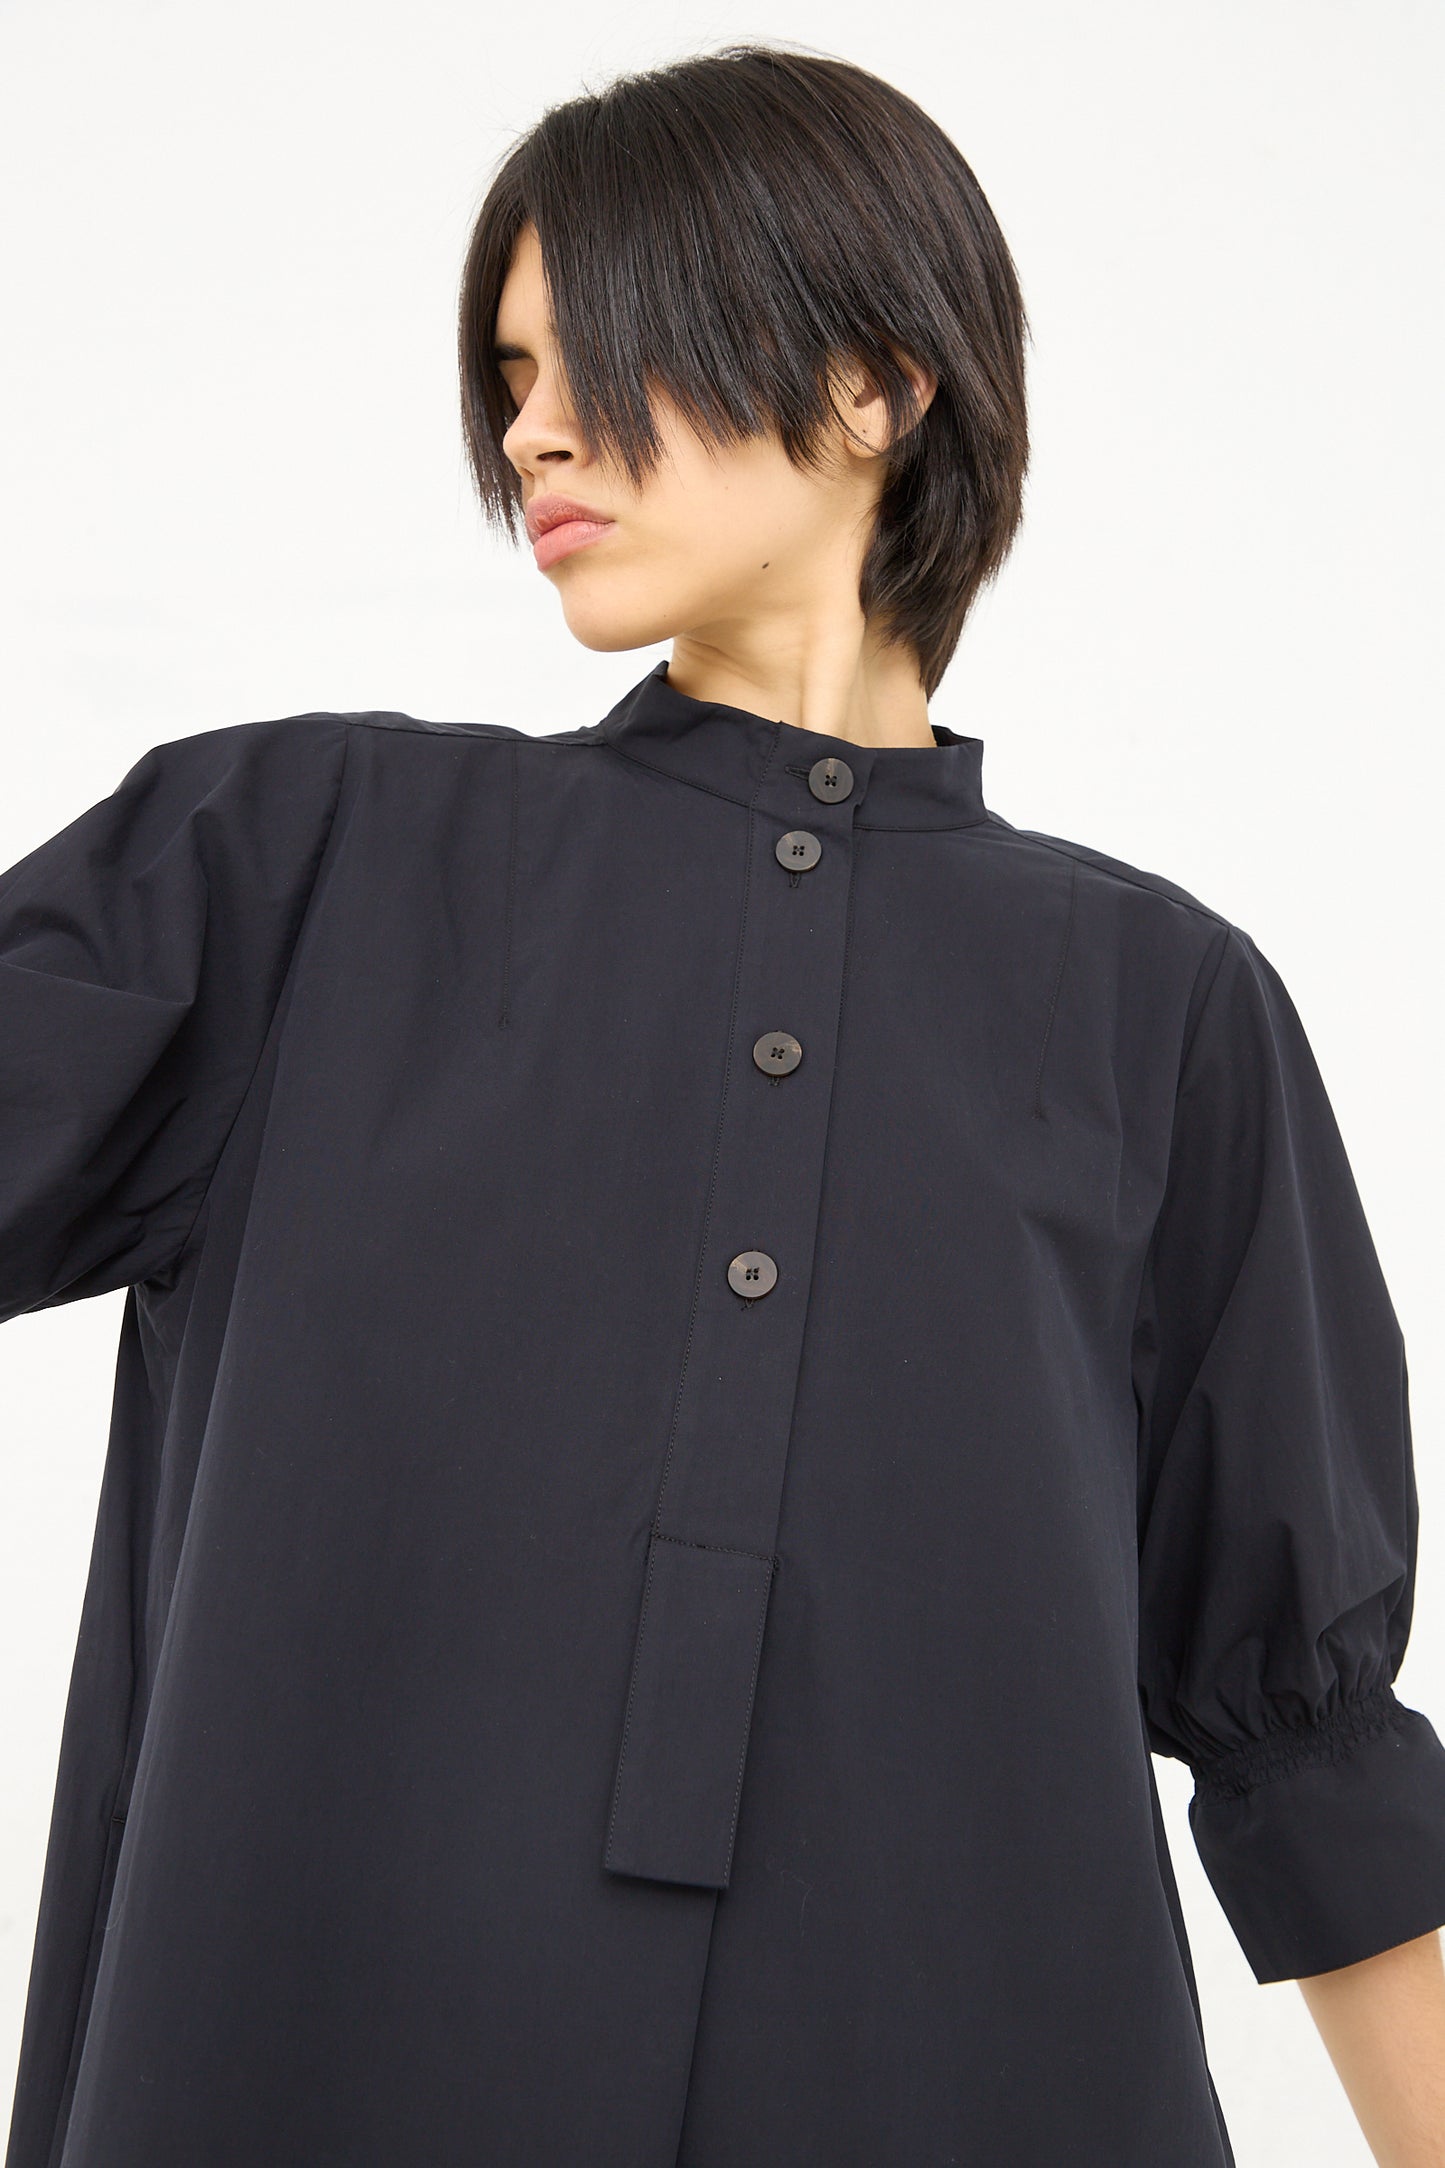 A woman with a short bob haircut is wearing a dark navy Knoll shirt dress with ruched cuff by Studio Nicholson, looking to the side against a white background.